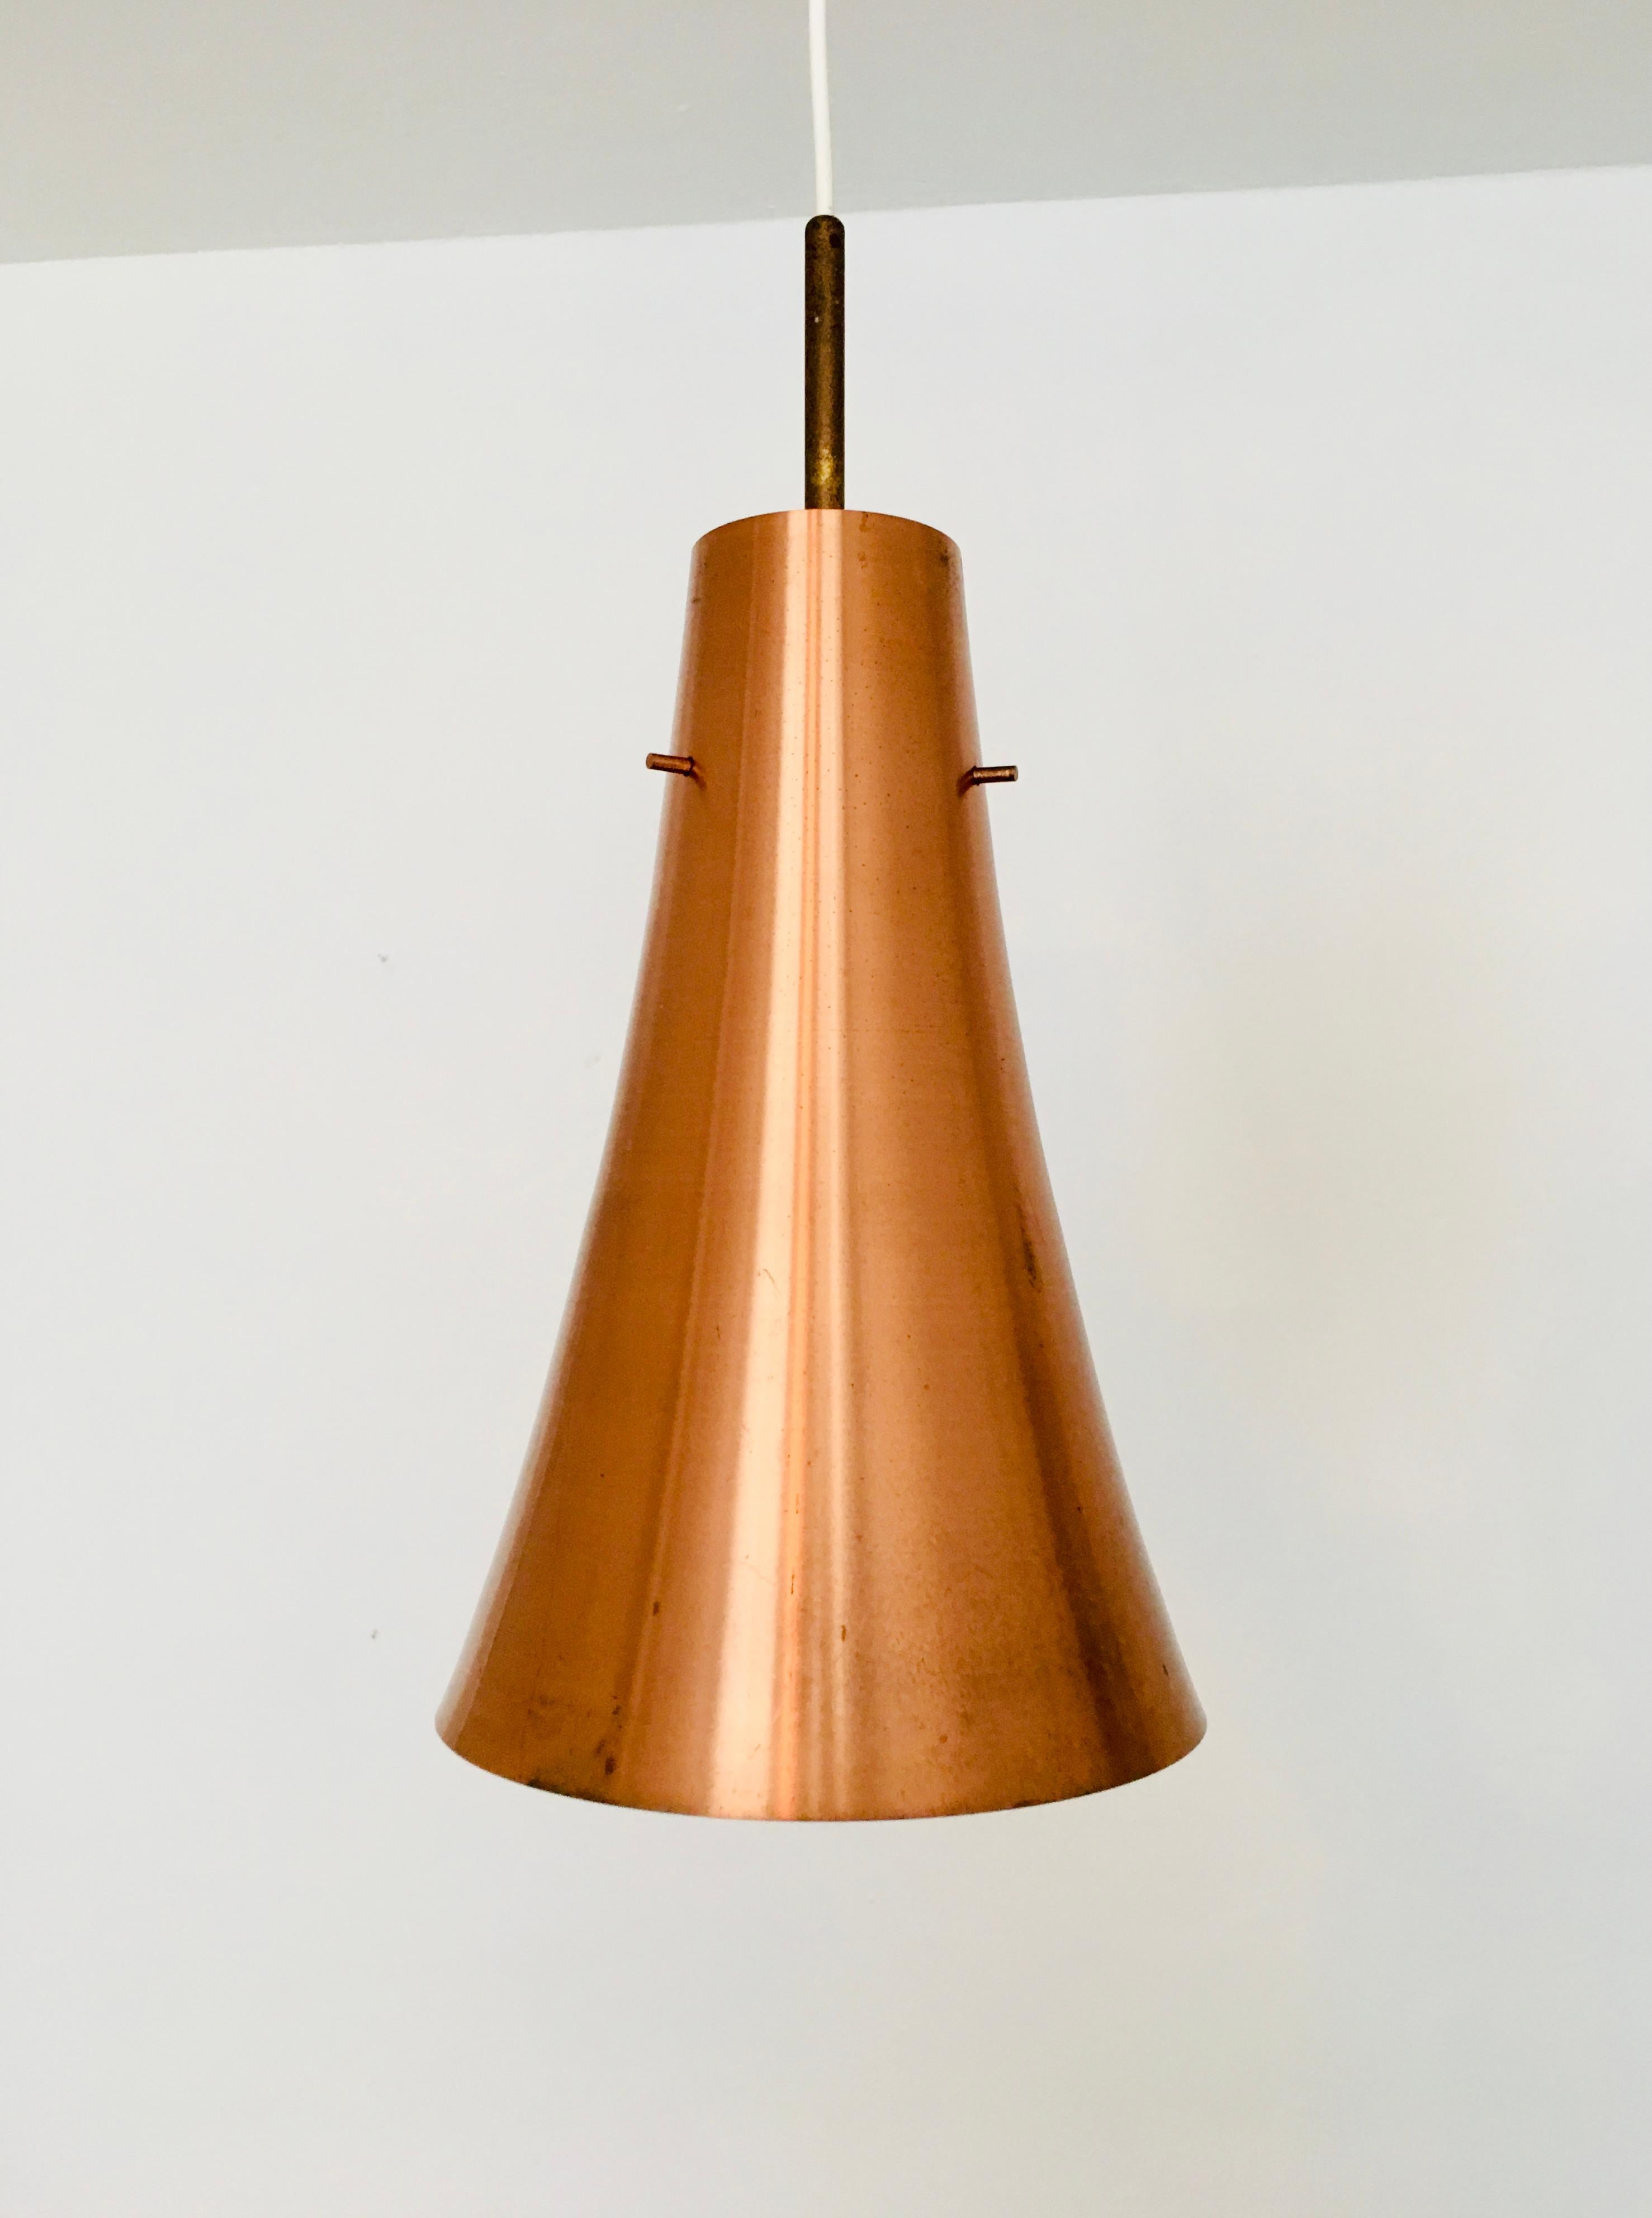 Very nice trumpet-shaped copper lamp from the 1950s.
The copper creates a very warm light that conveys a strong sense of security.
Great solid workmanship and a real eye-catcher for every home.

Condition:

Good vintage condition with signs of